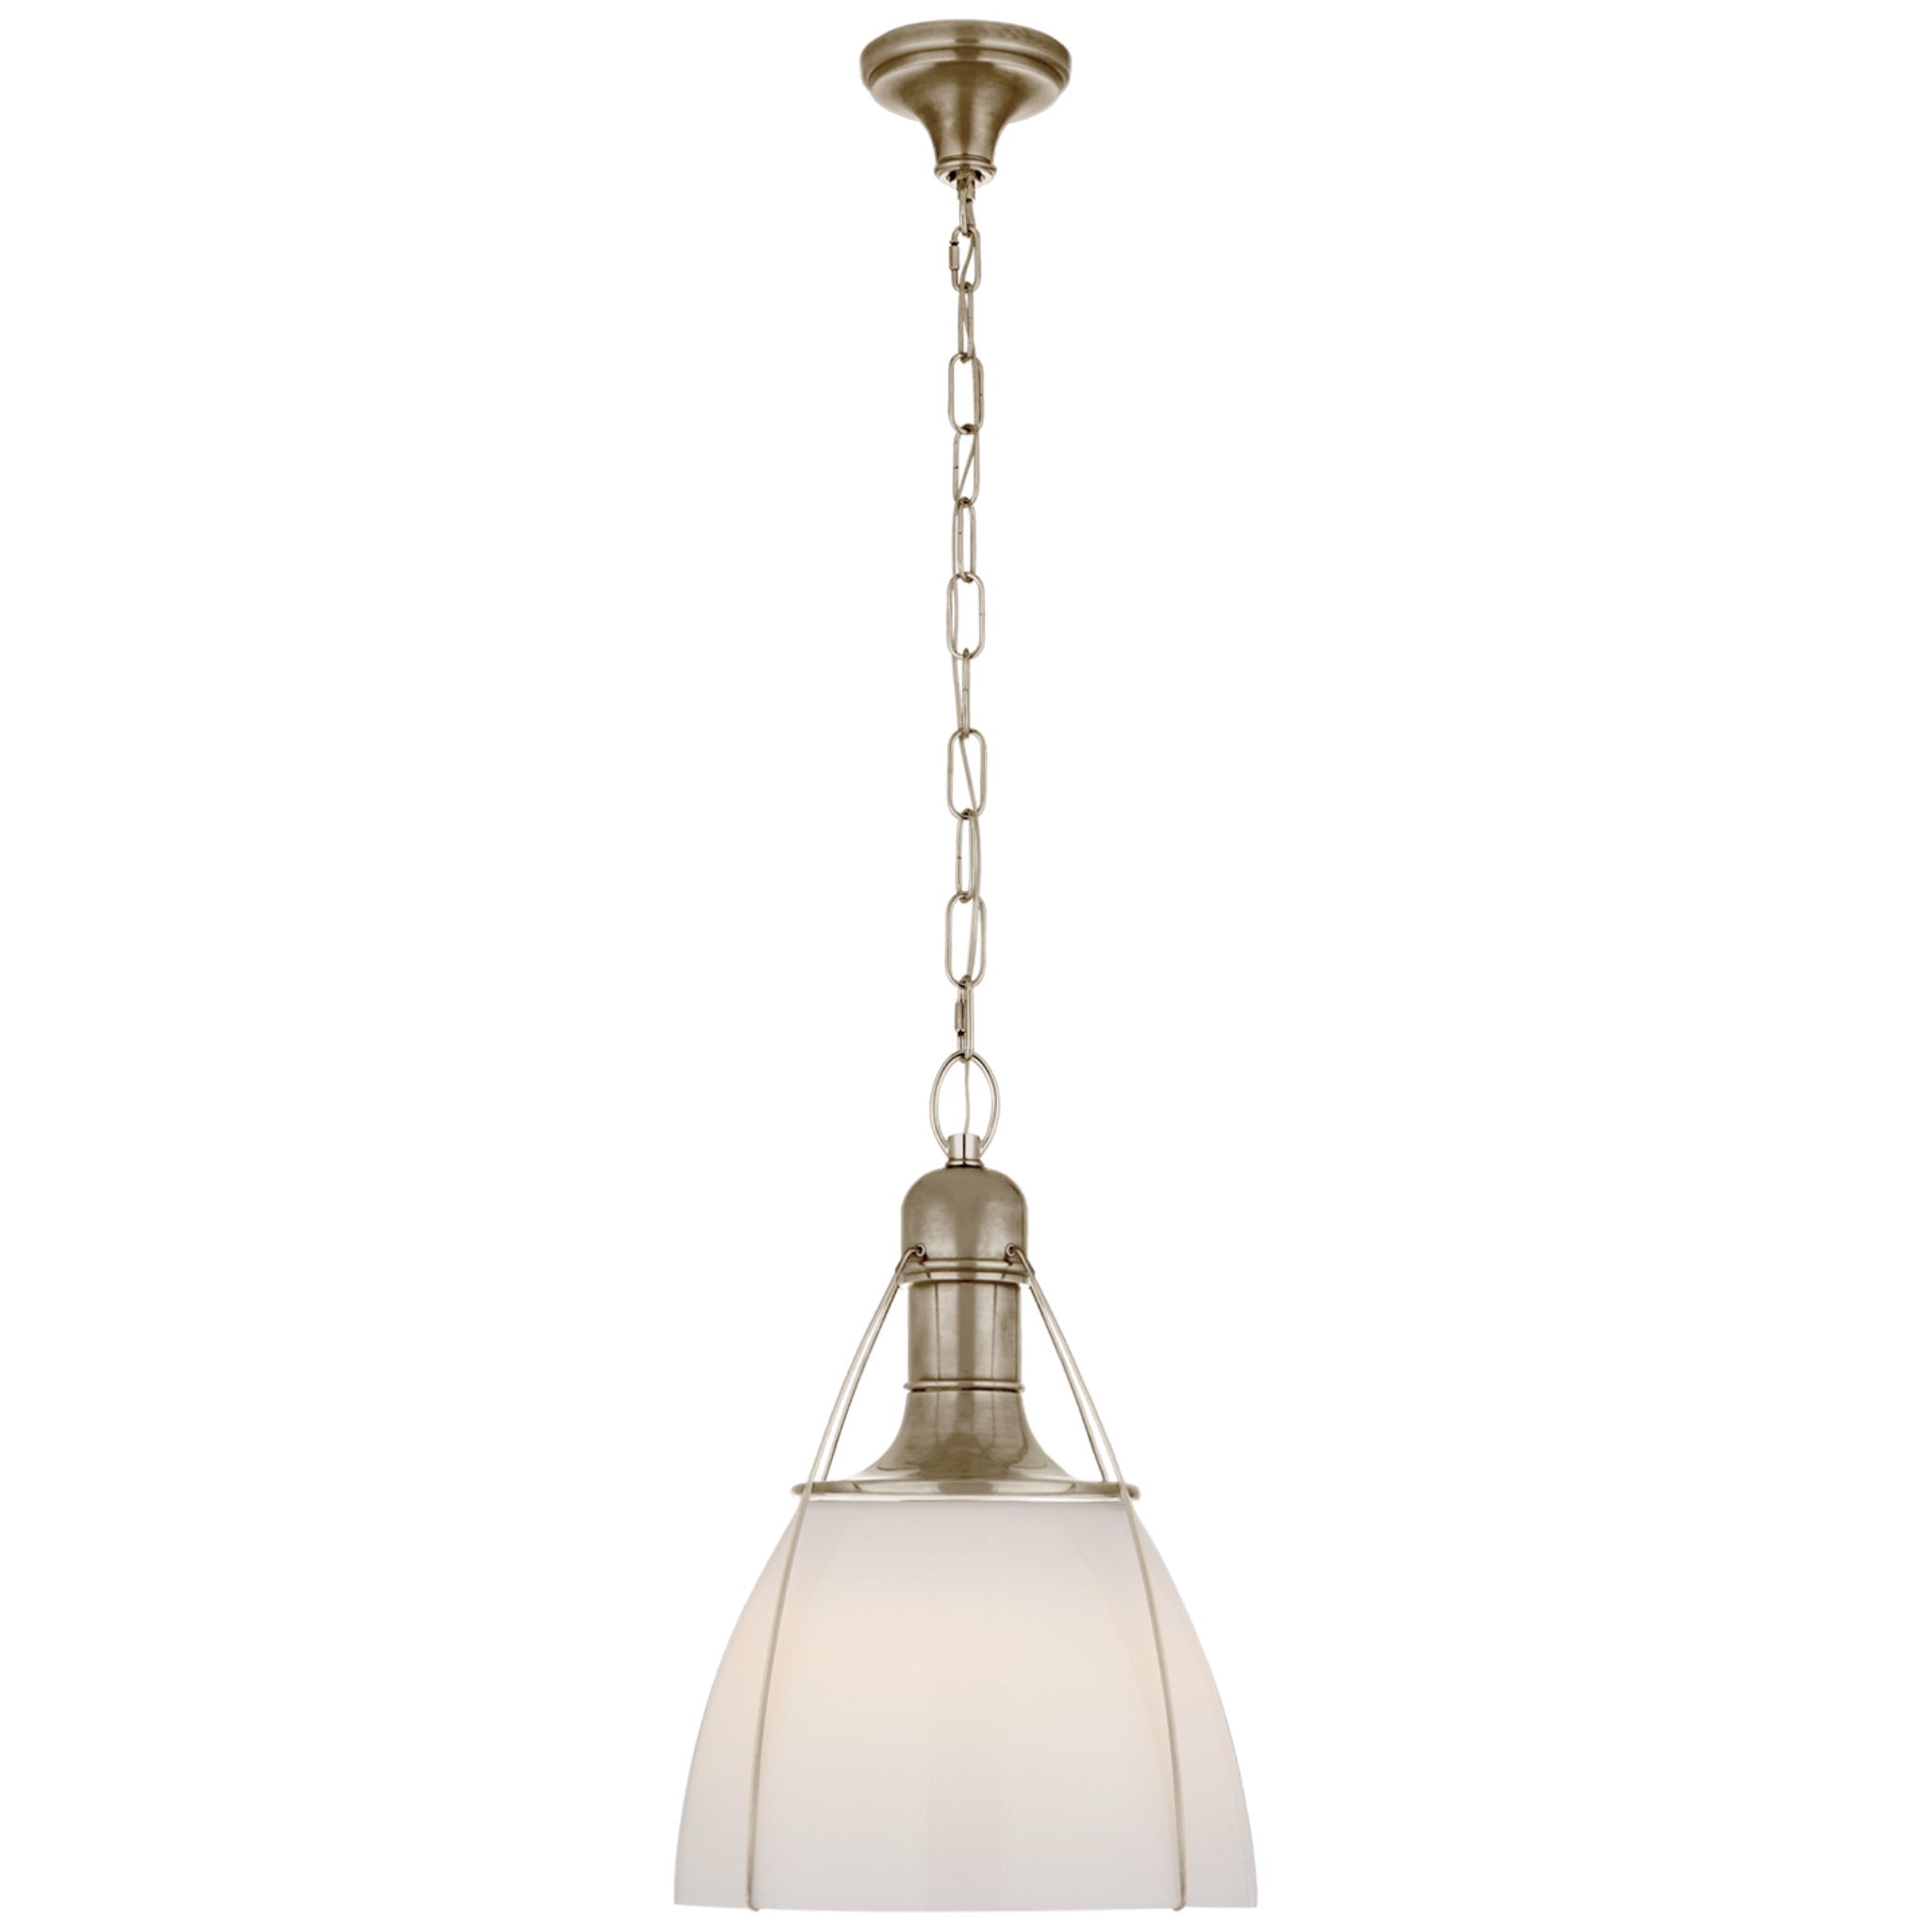 Chapman & Myers Prestwick 18" Pendant in Antique Nickel with White Glass